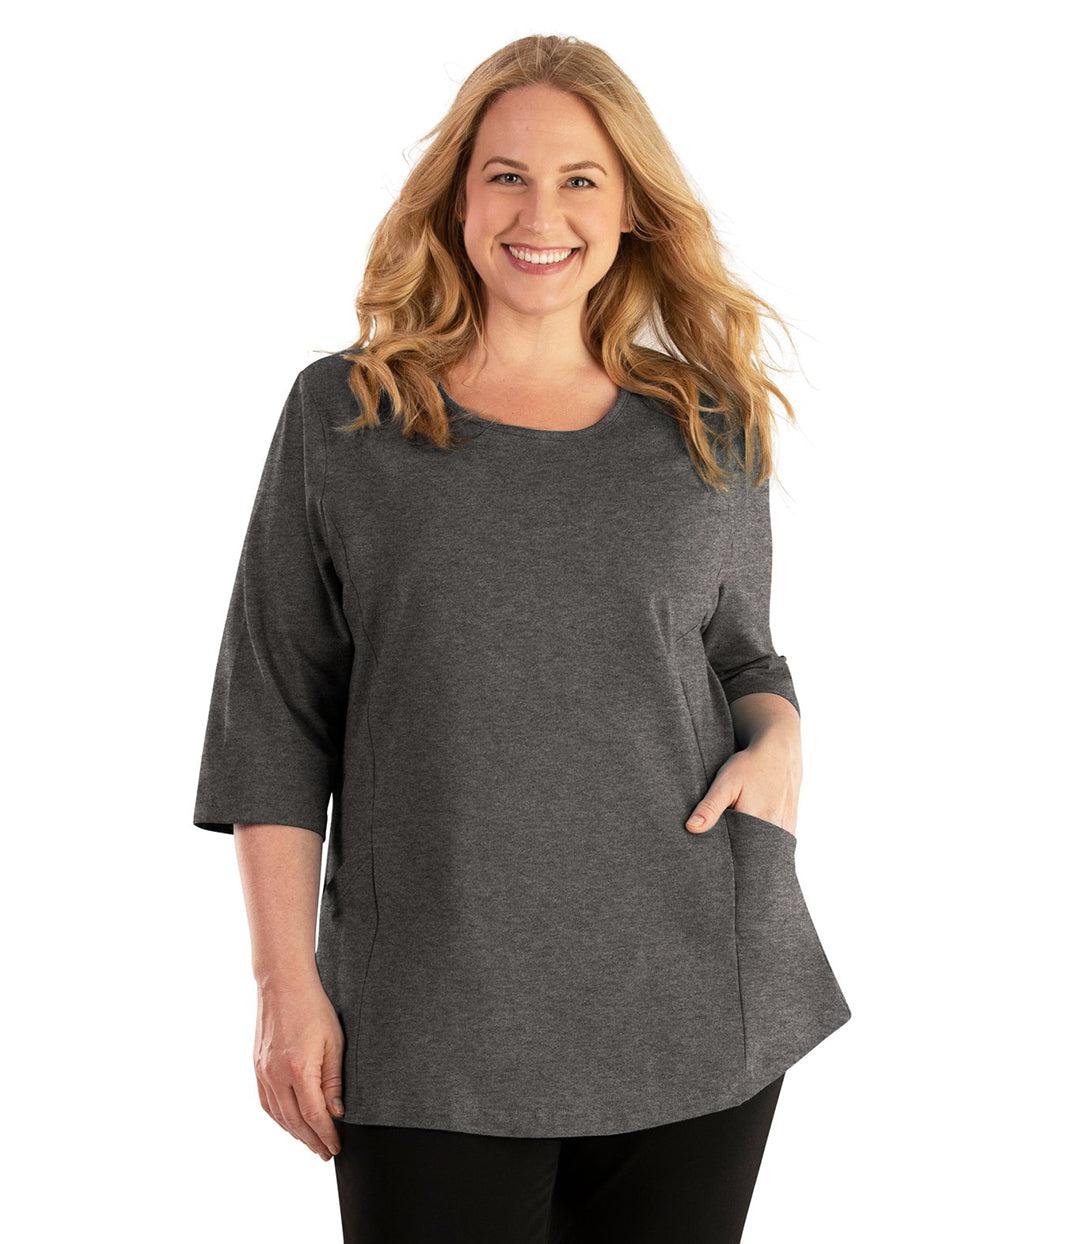 stretch naturals pocketed top-plus size activewear athletic